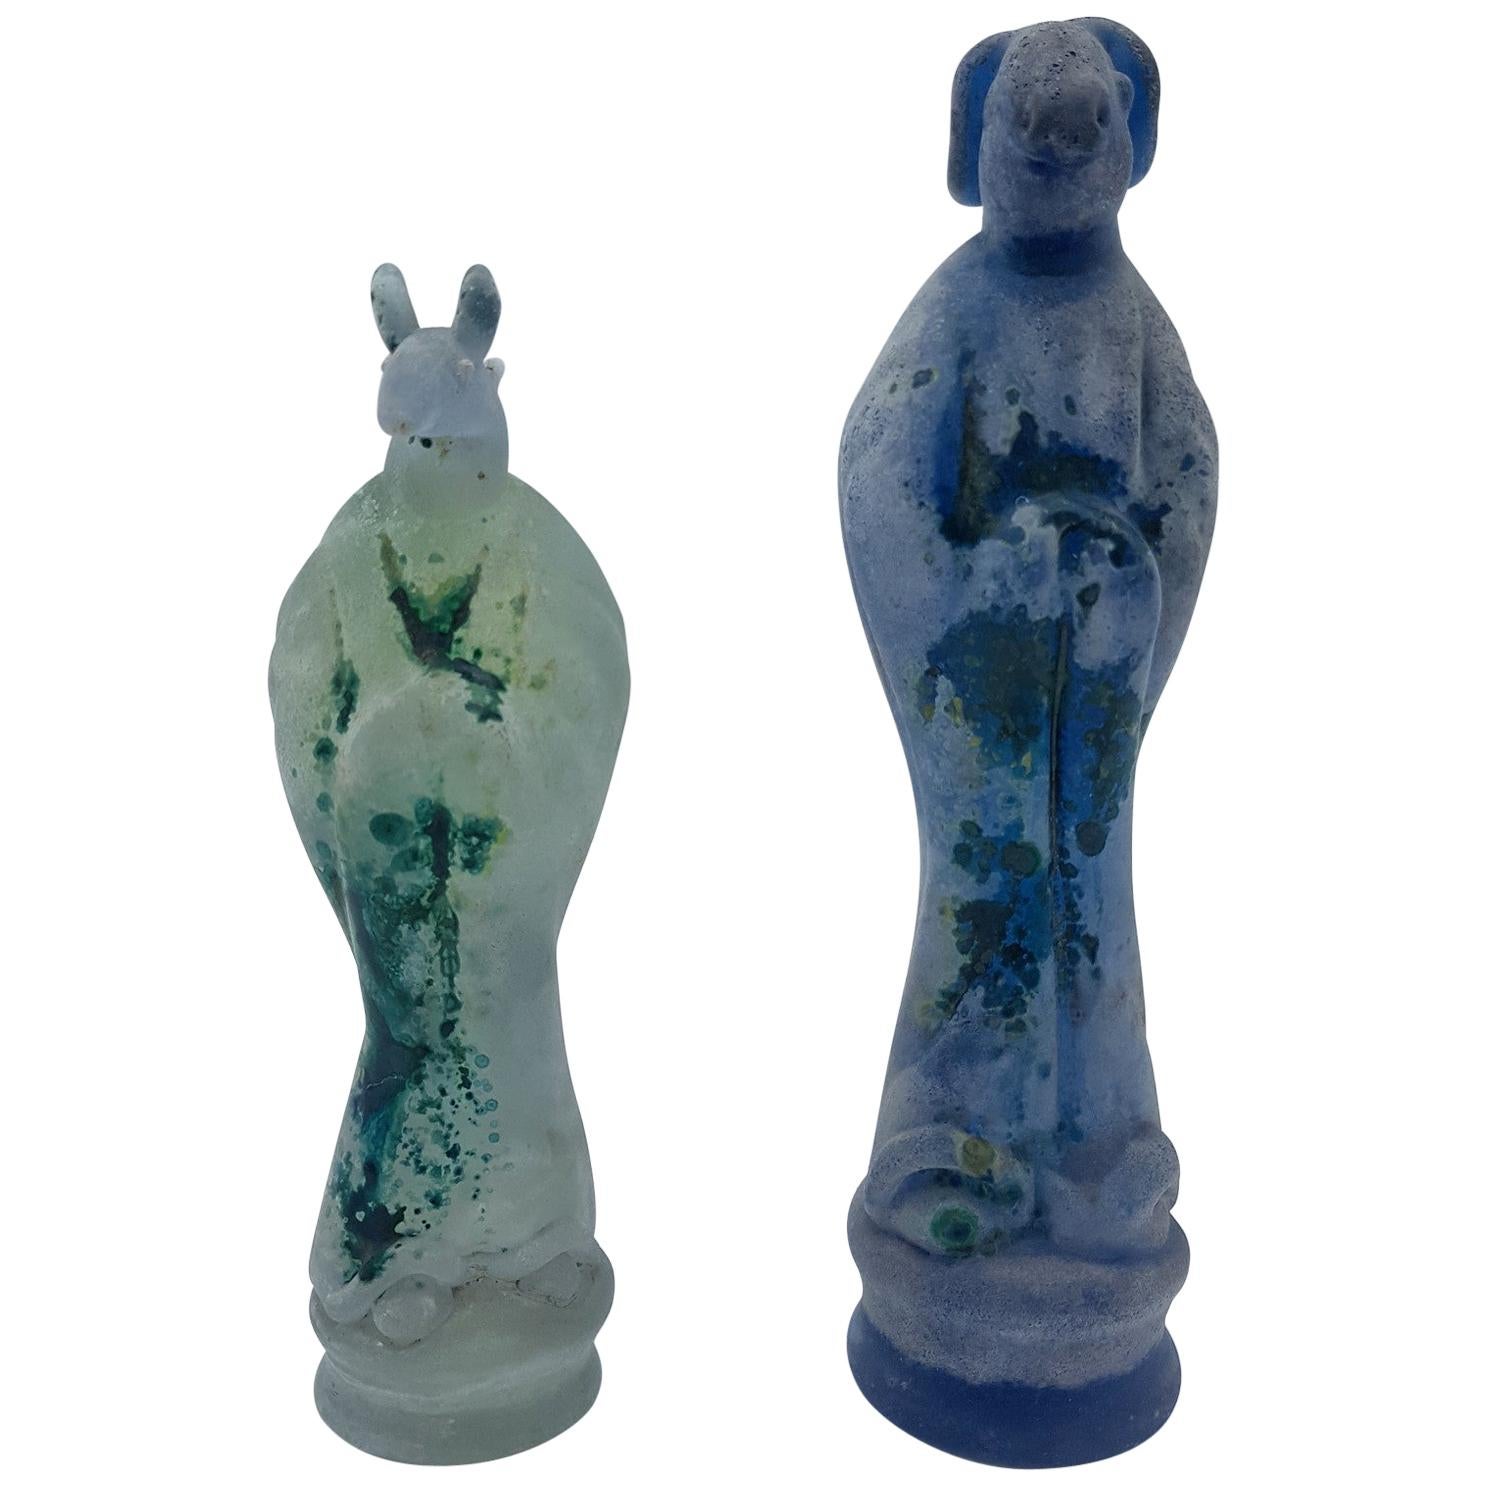 Pair of Rare Vintage Murano Glass Zoomorphic Satuettes by E. Nason at Cenedese For Sale